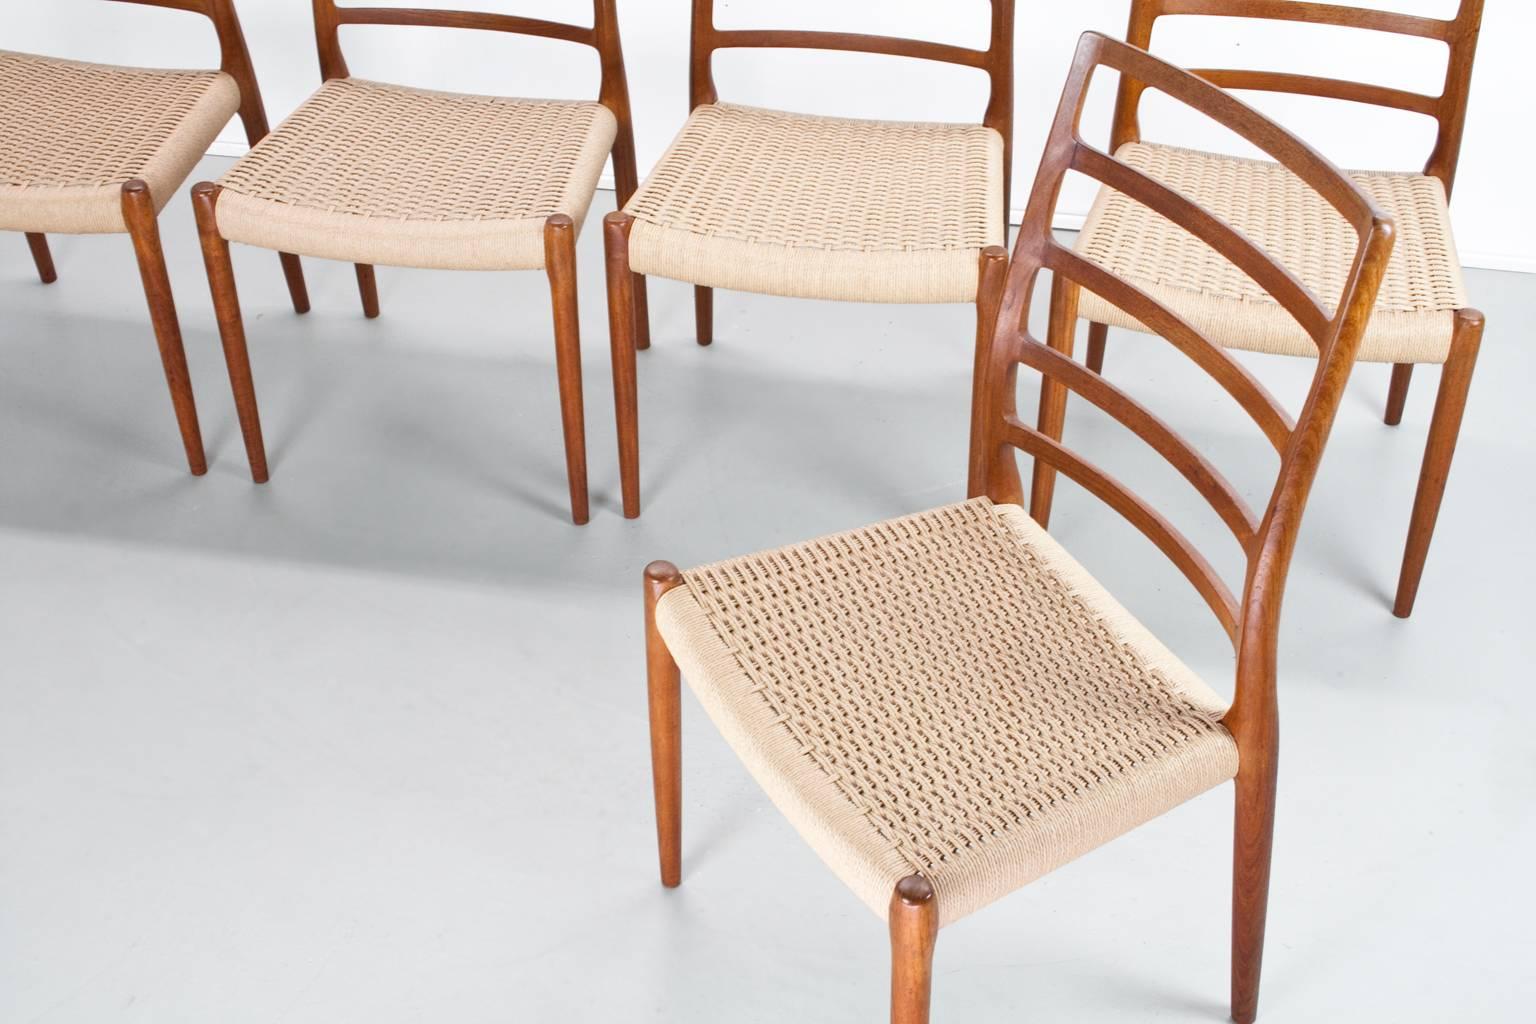 Danish Set of 5 Scandinavian Modern Chairs in teak and paper cord by Niels Moller